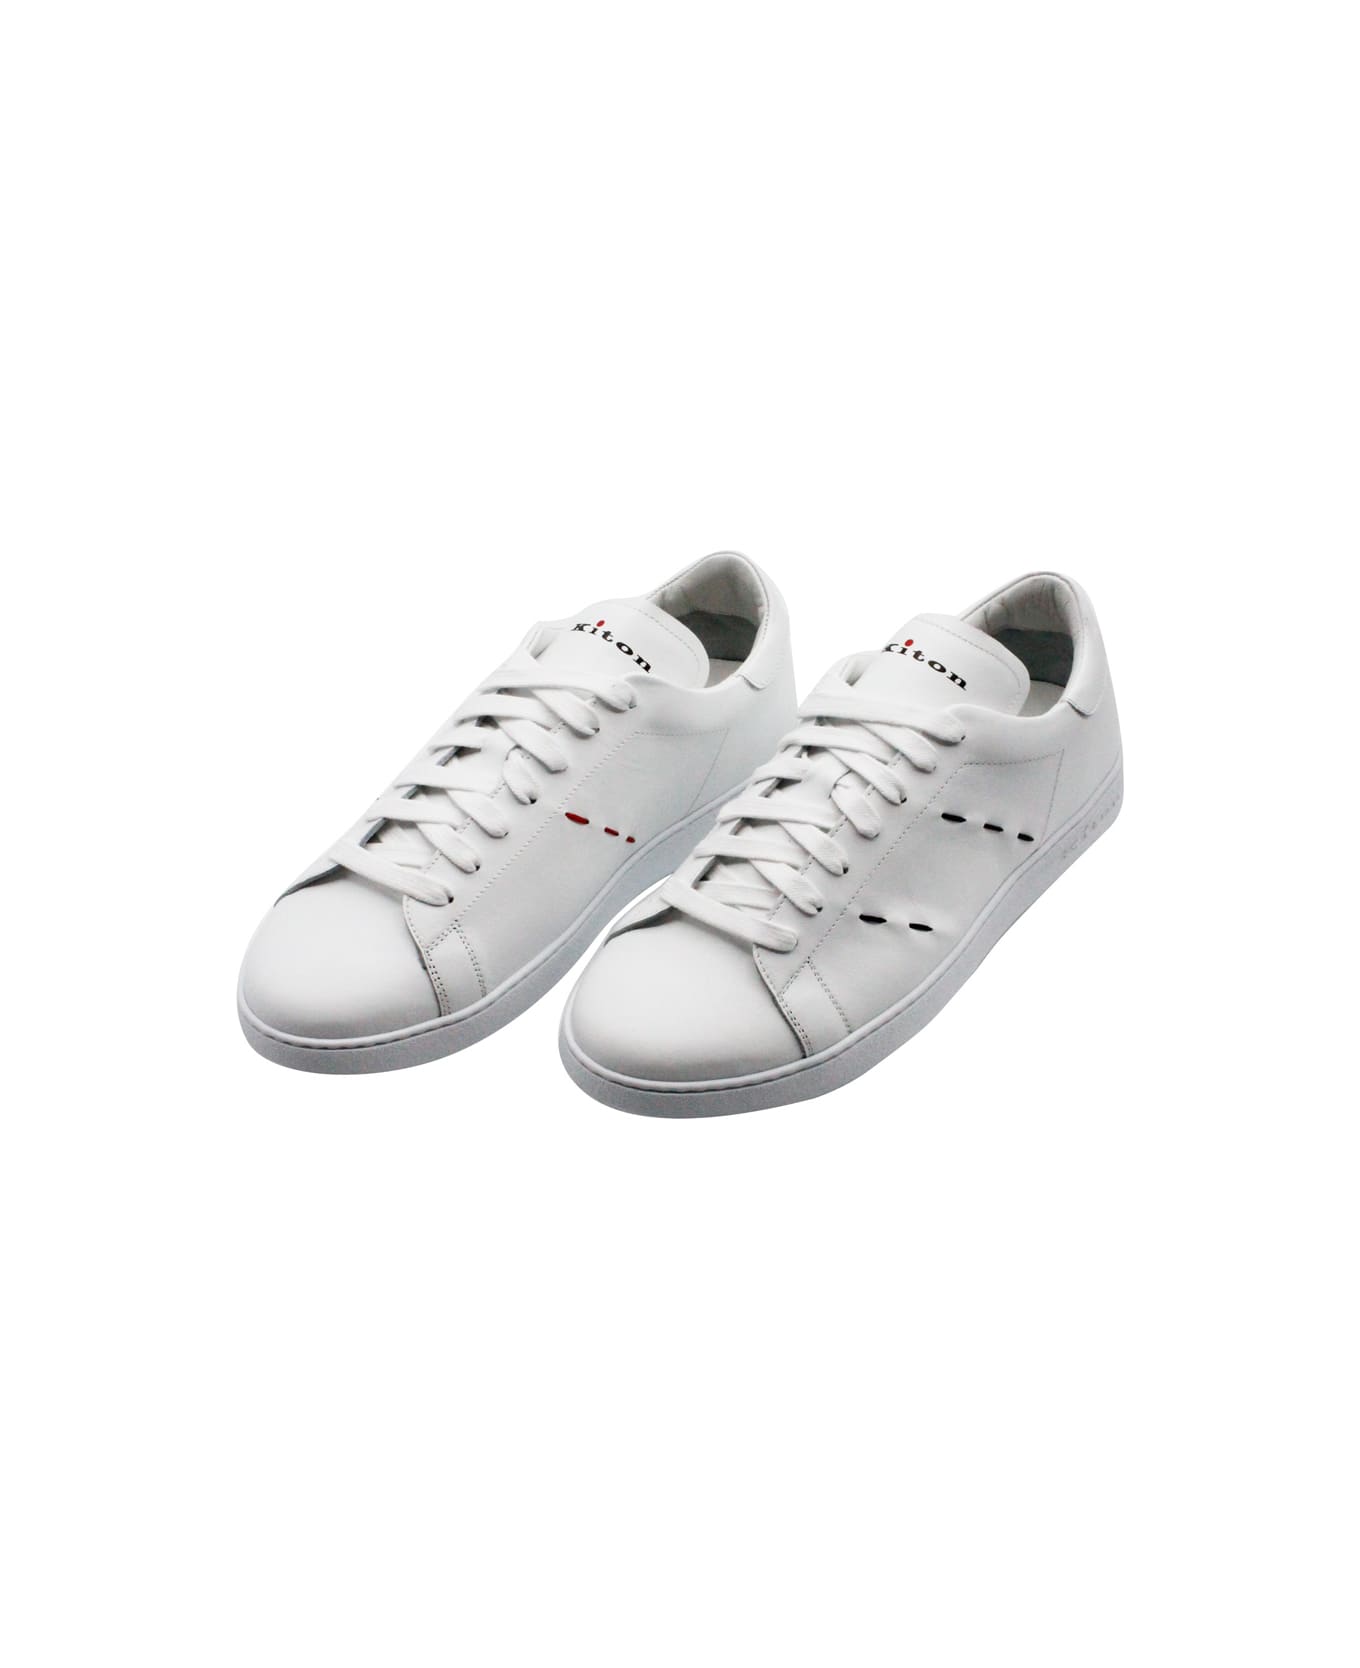 Kiton Lightweight Sneaker Shoe In Soft Leather With Contrasting Color Finishes And Stitching. Tongue With Logo Print And Lace Closure. - White